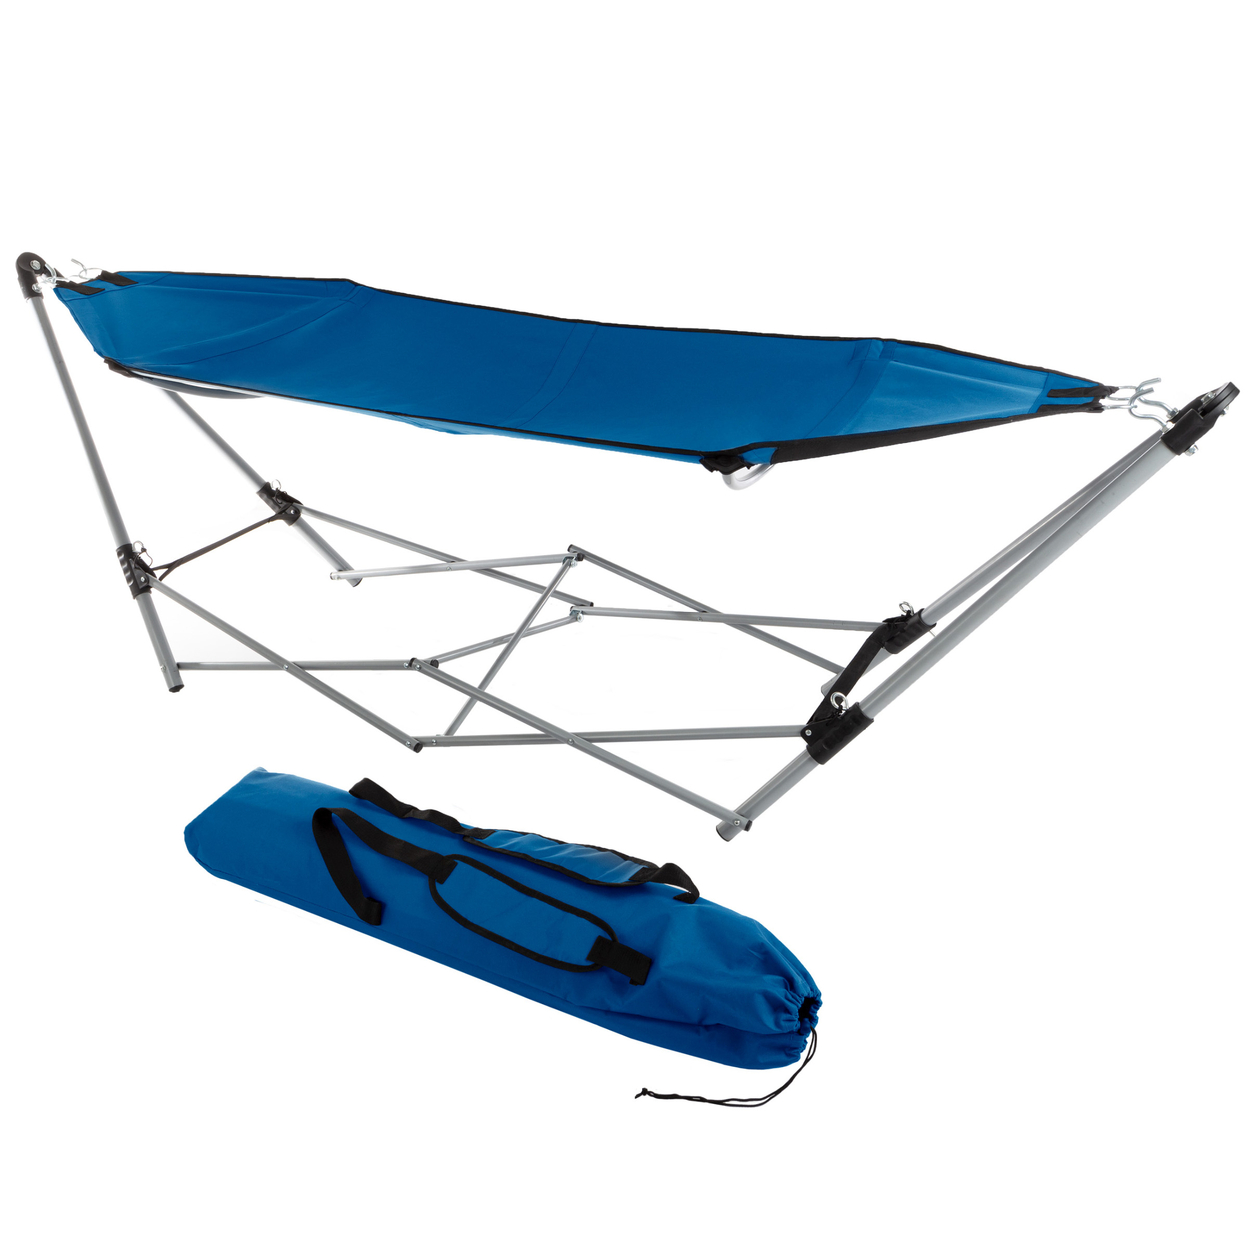 Hammock With Stand Portable Hammock Fits Into Carry Bag For Easy Travel, Blue